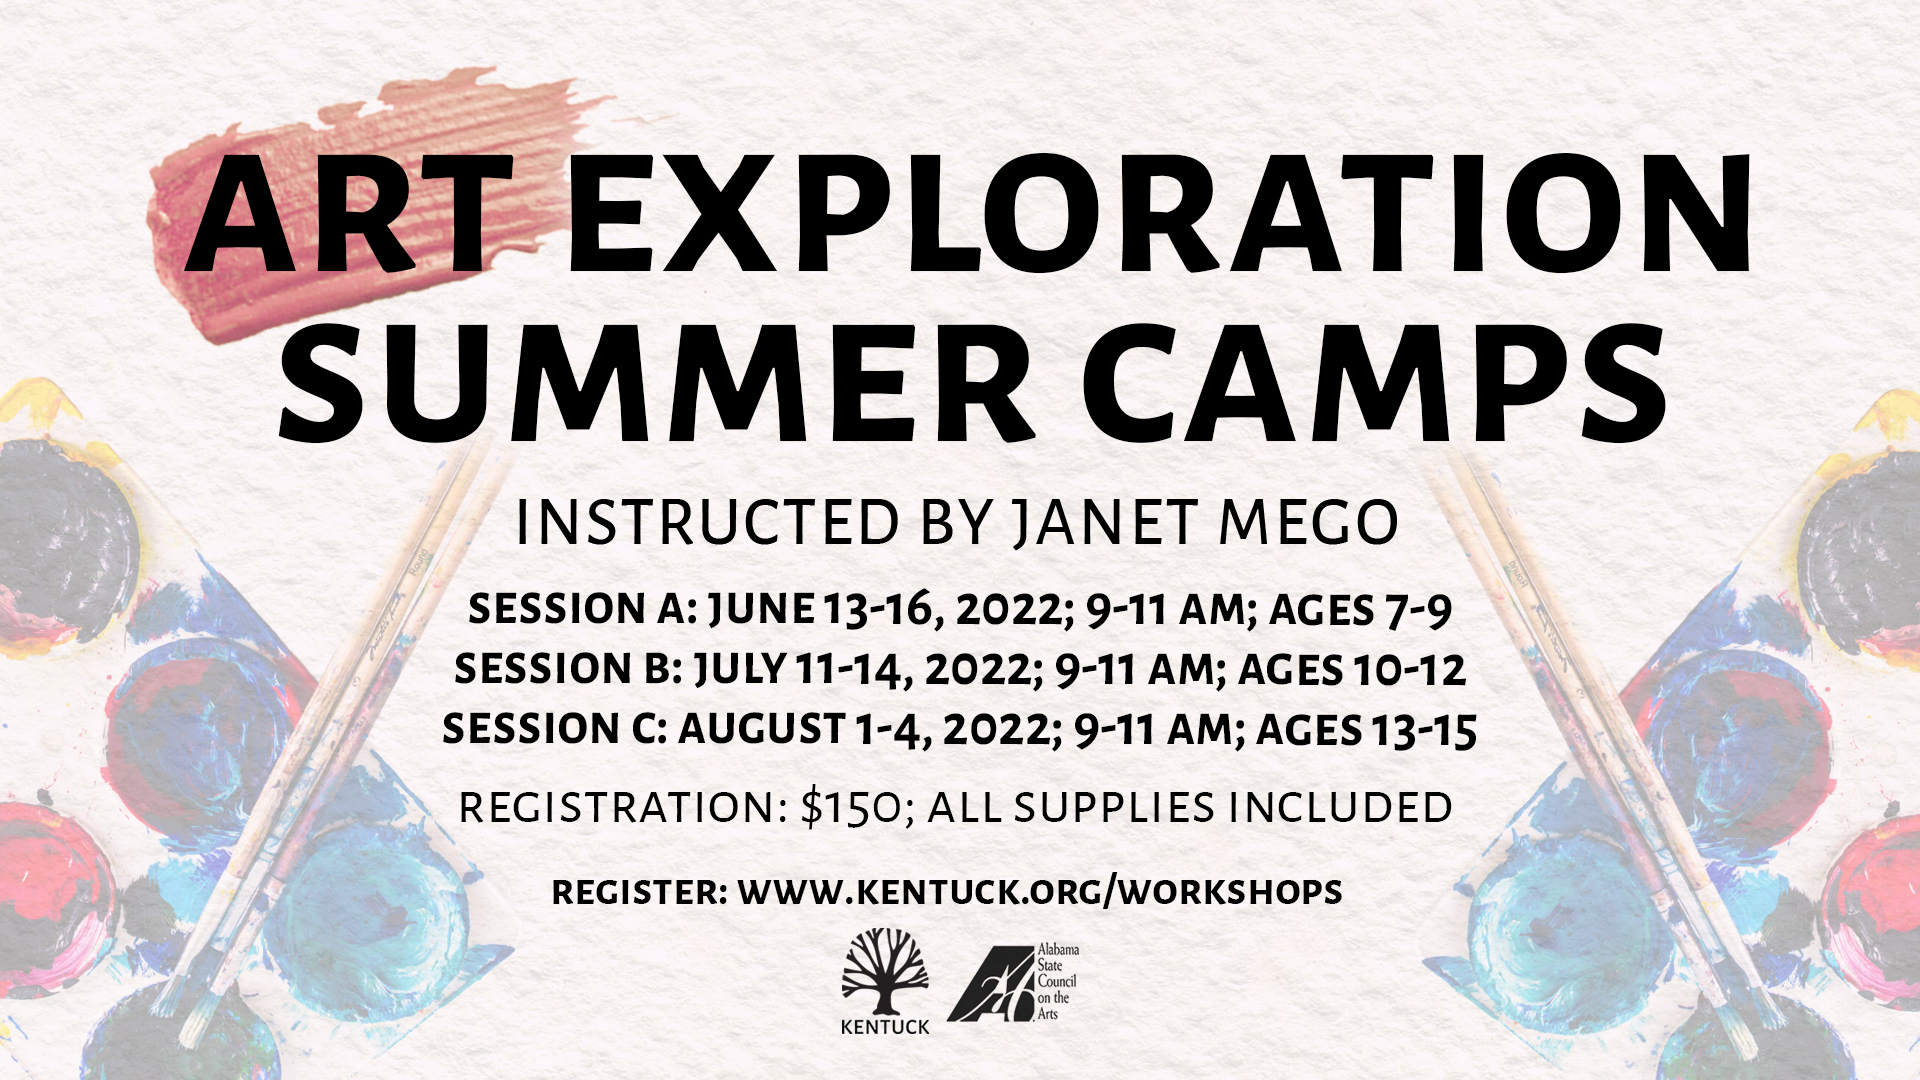 Session A: Art Exploration Camp with Janet Mego